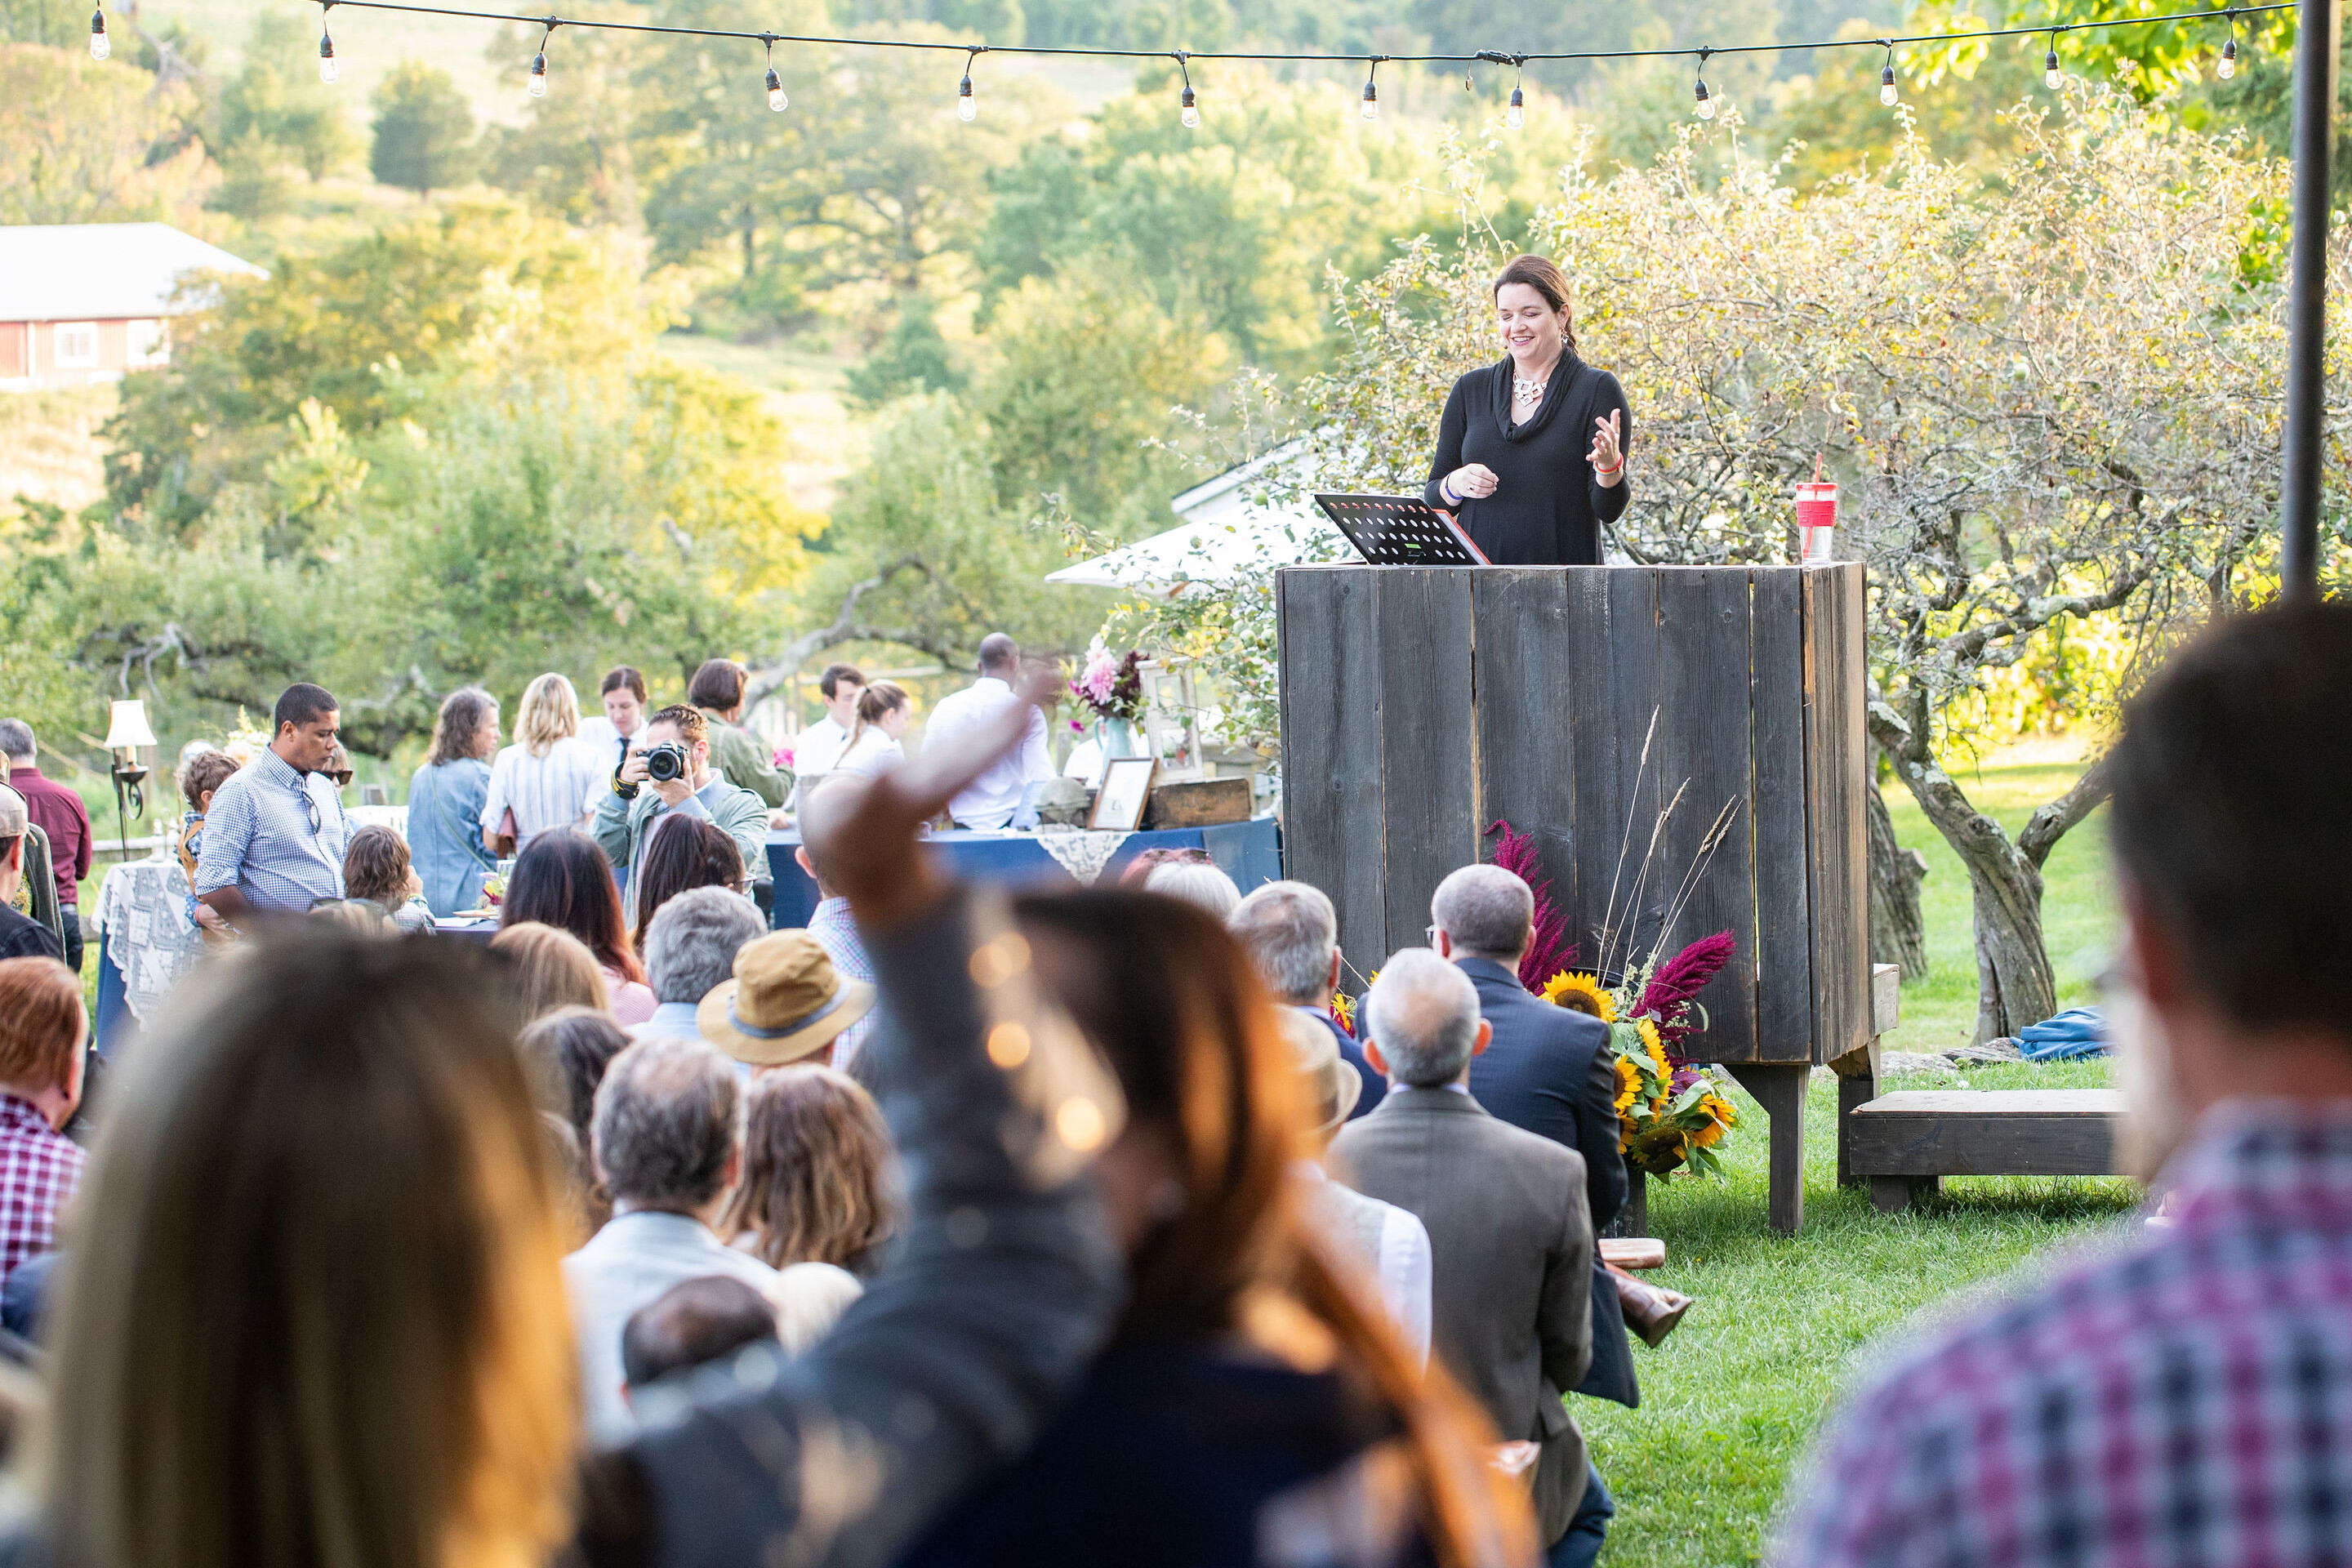 woman auctioneer at a fundraising event in a apple orchard raiaing funds for a nonprofit